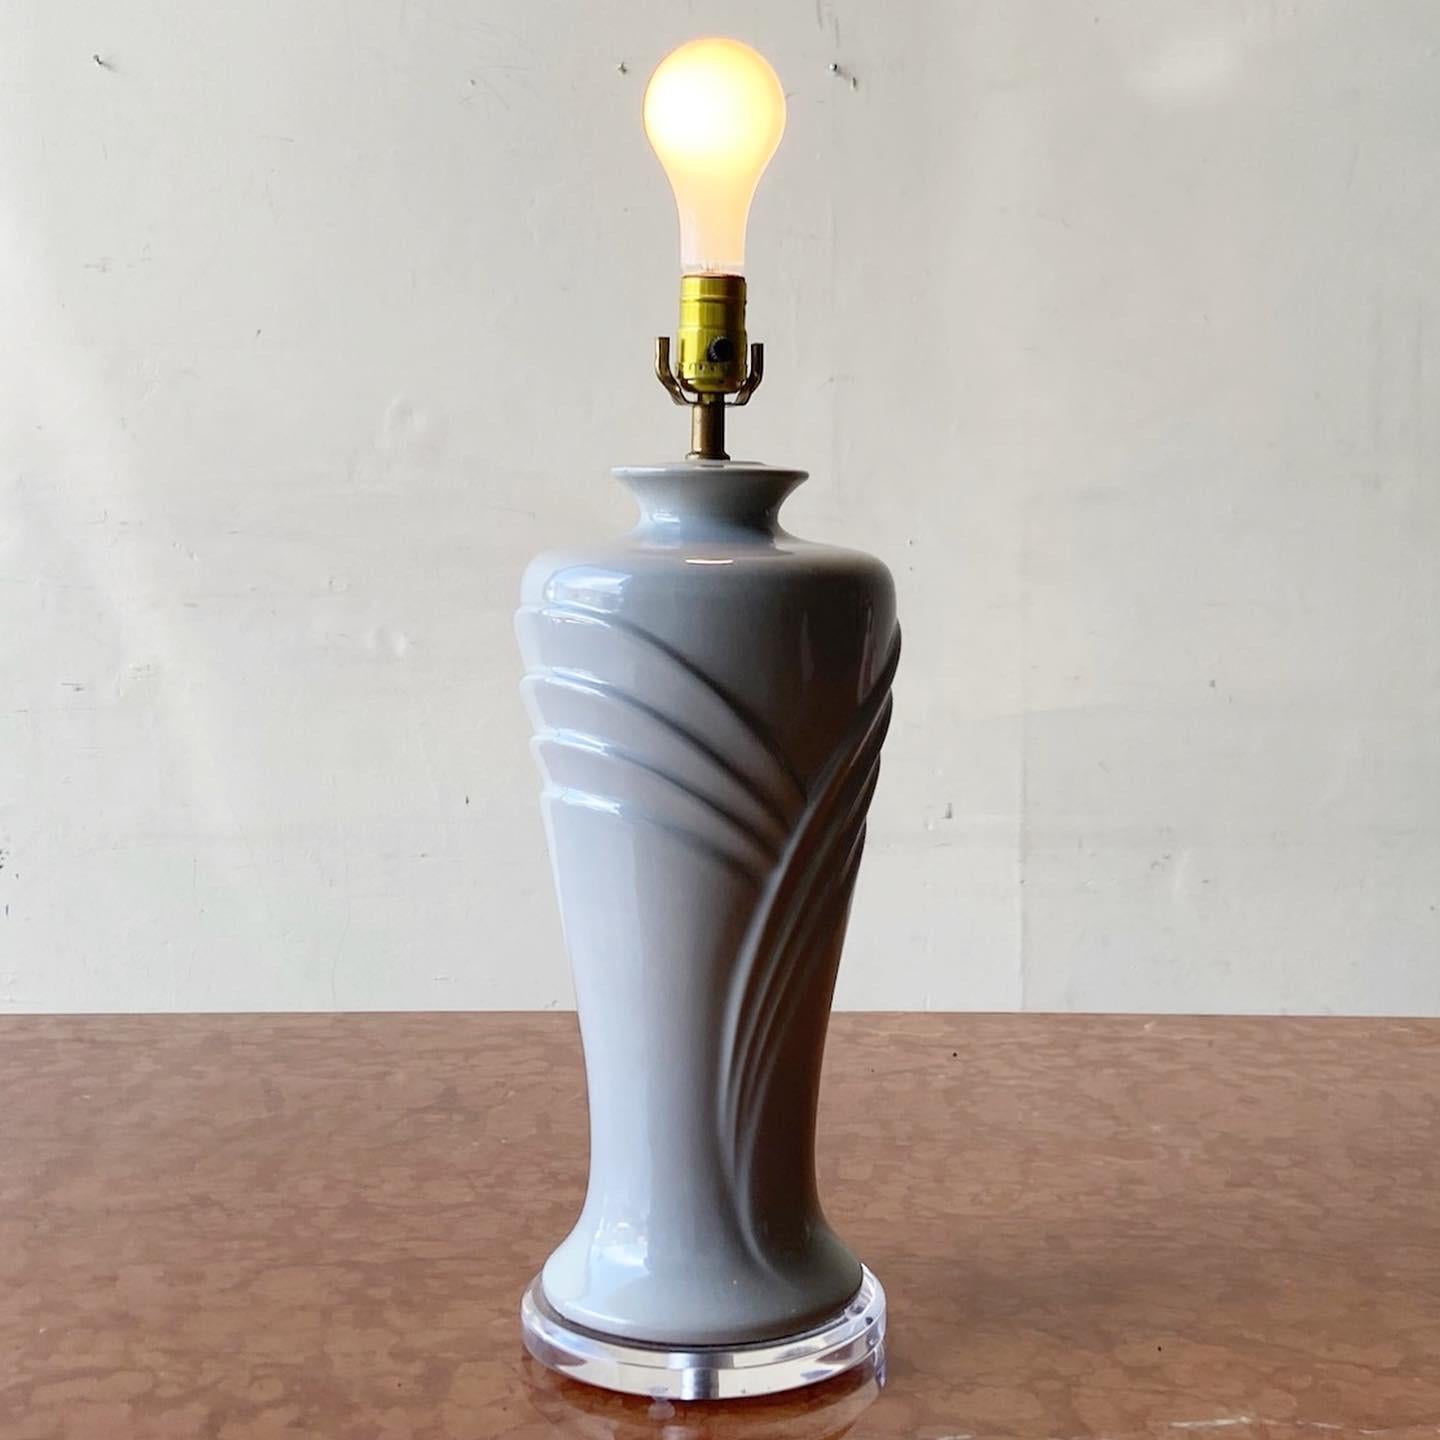 Amazing postmodern ceramic table lamp. Features a lucite base and grey glossy finish.

3 Way lighting.